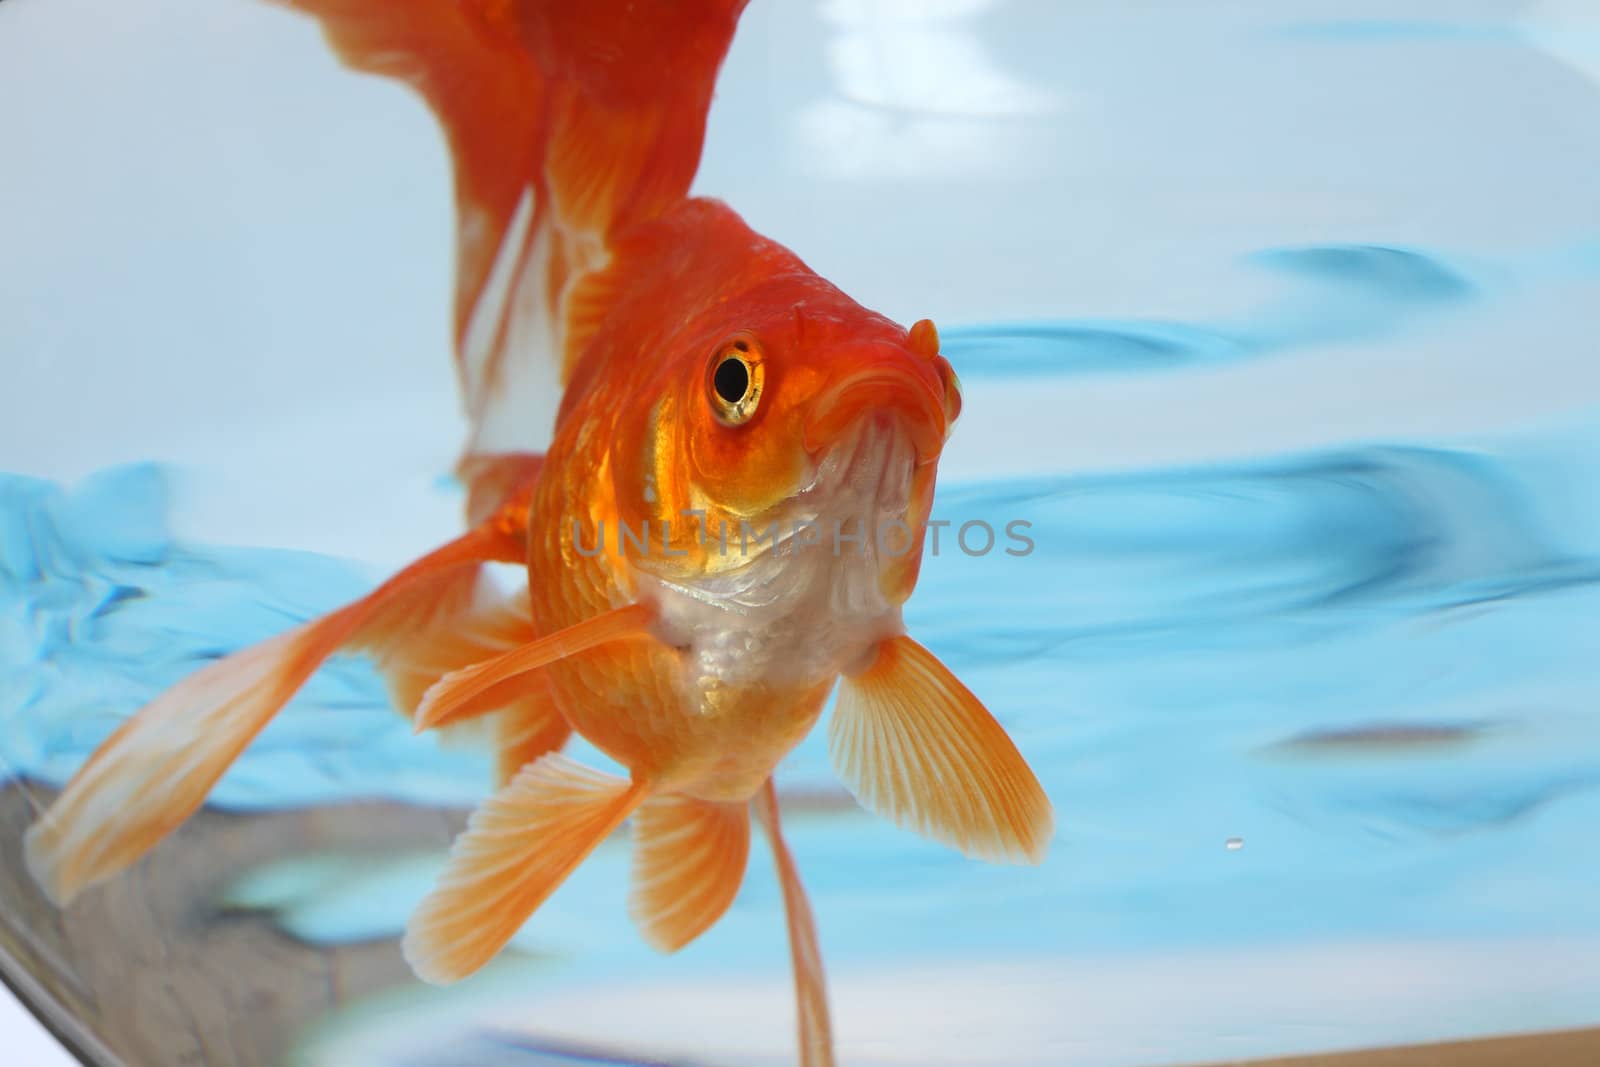 The gold small fish floats in an aquarium close up
